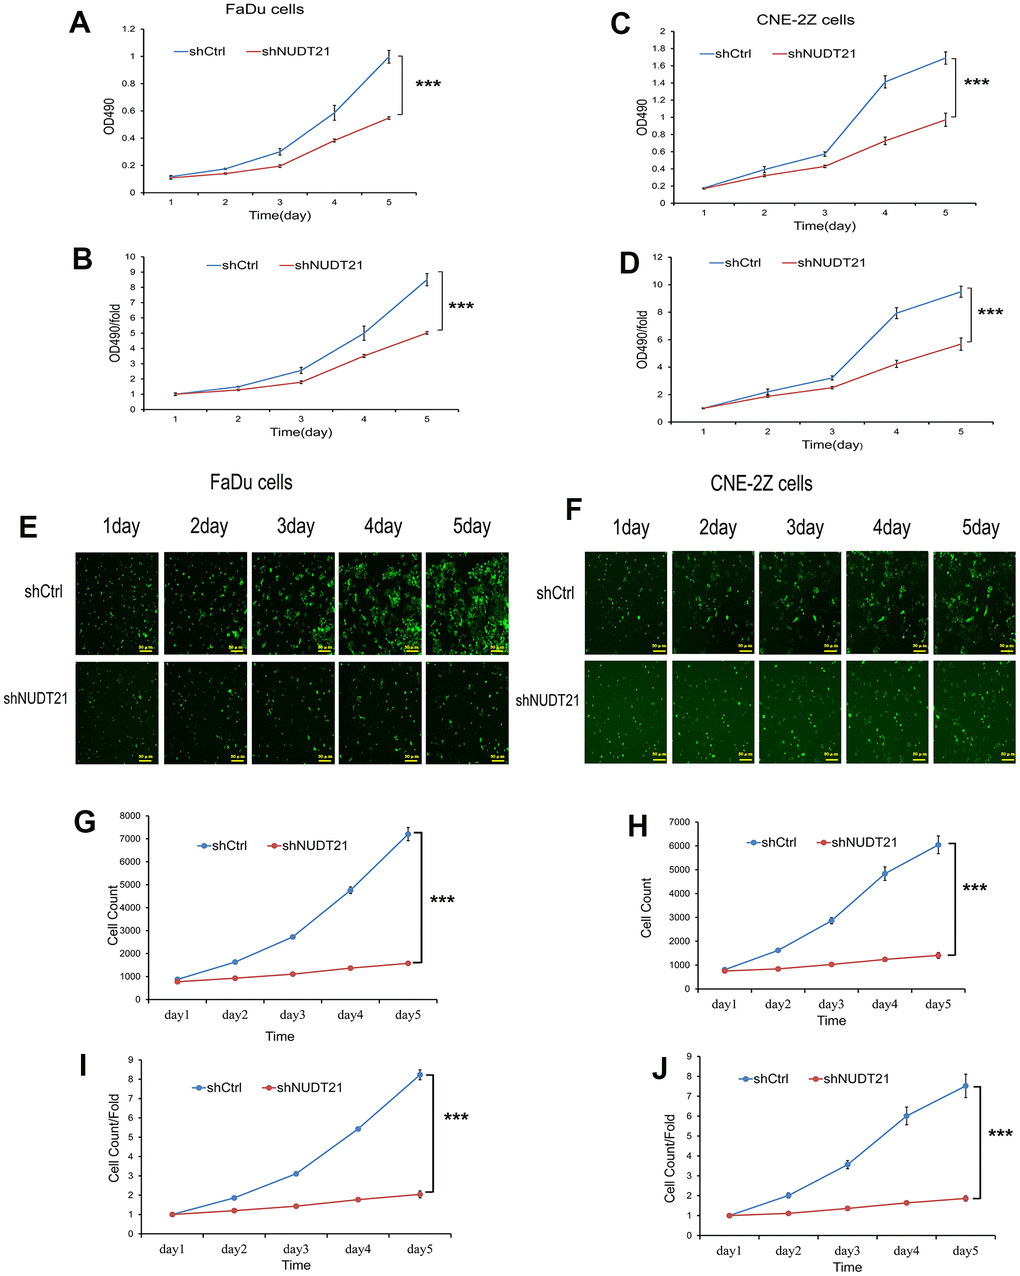 Knockout of NUDT21 inhibits the proliferation of FaDu and CNE-2Z cells. (A–D) Measurement of cell proliferation in shCtrl and shNUDT21 treated cells using MTT assay. (E, F) Raw images of shCtrl and shNUDT2-treated cell growth (unprocessed by software algorithms) were obtained by applying Celigo® cytometer imaging analysis. (G, H) shCtrl and shNUDT21-treated cells were inoculated in 96-well plates and cell growth was measured daily for 5 days. (I, J) Cell growth rates were monitored by assays on days 2, 3, 4, and 5. (shCtrl: control lentivirus; shNUDT21: lentivirus containing shRNA targeting NUDT21). ***P